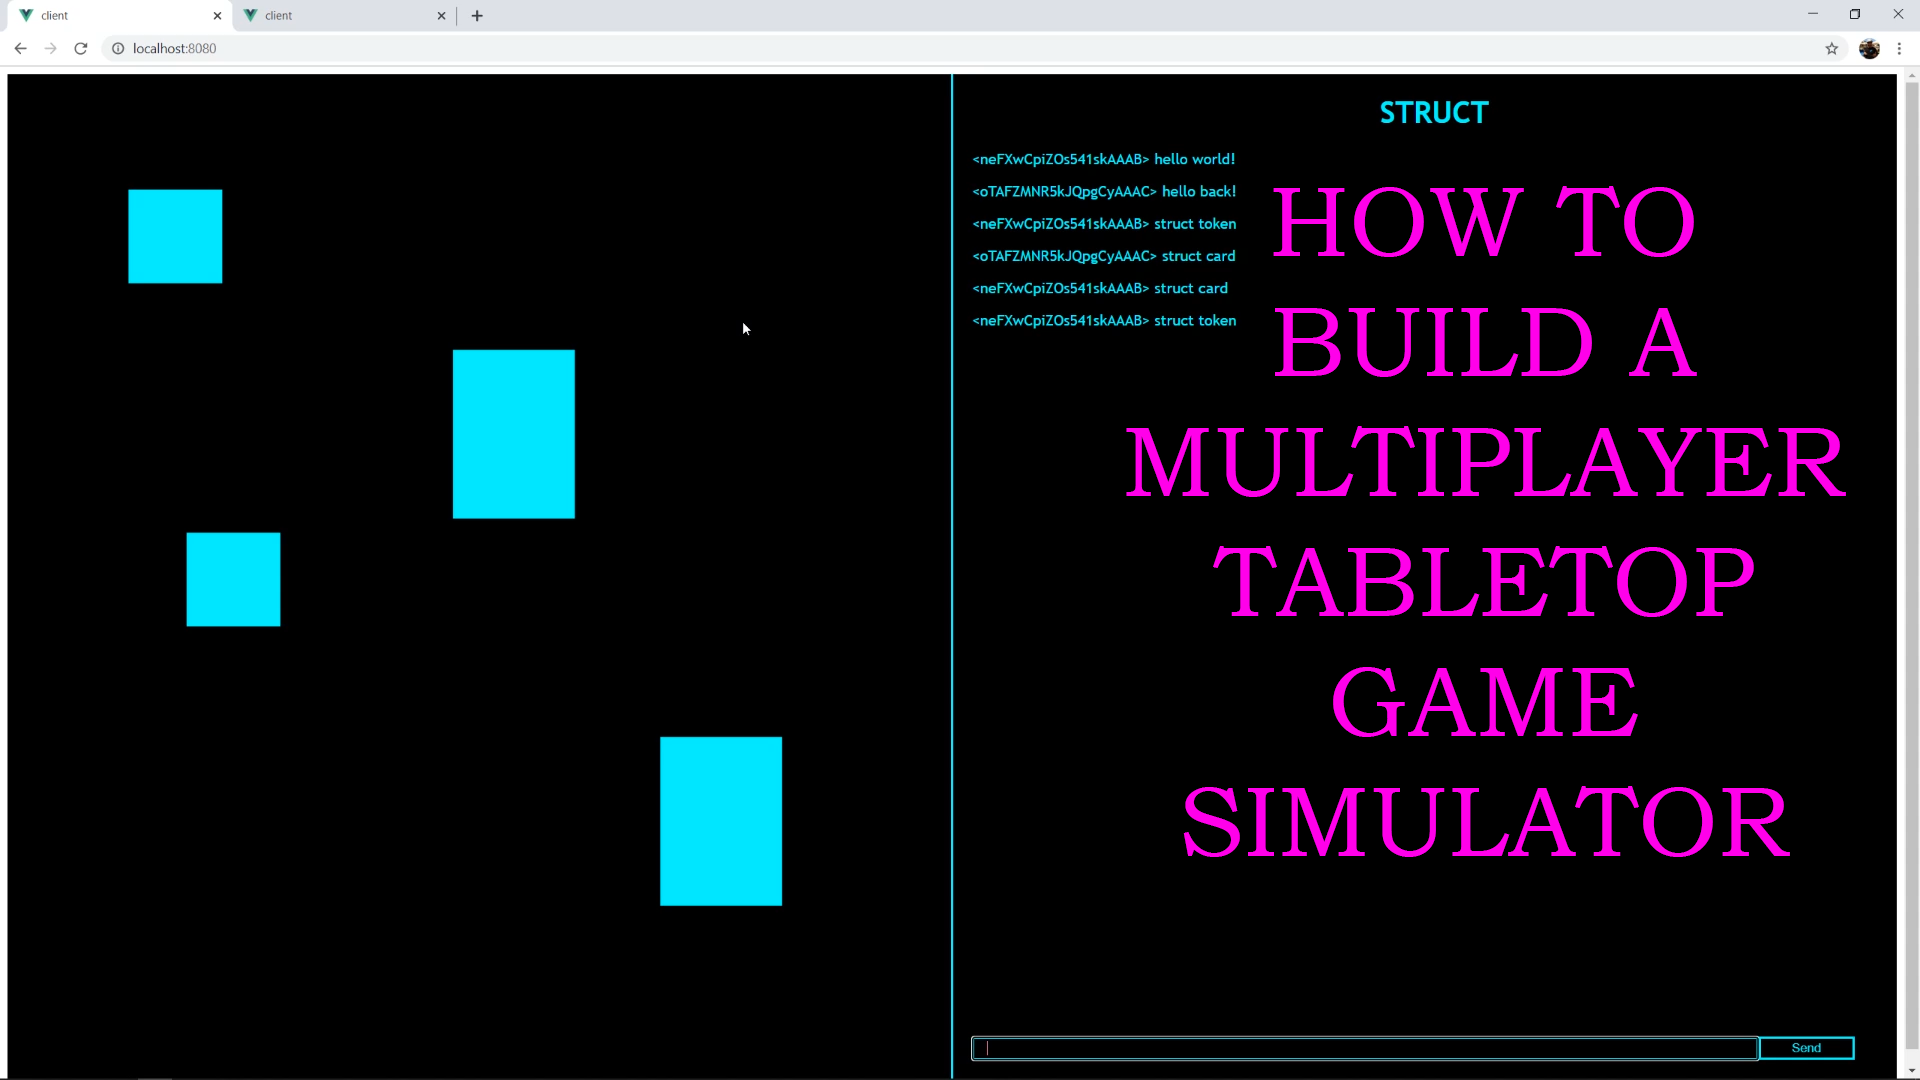 How to Build a Multiplayer Tabletop Game Simulator with Vue, Phaser, Node, Express, and Socket.IO